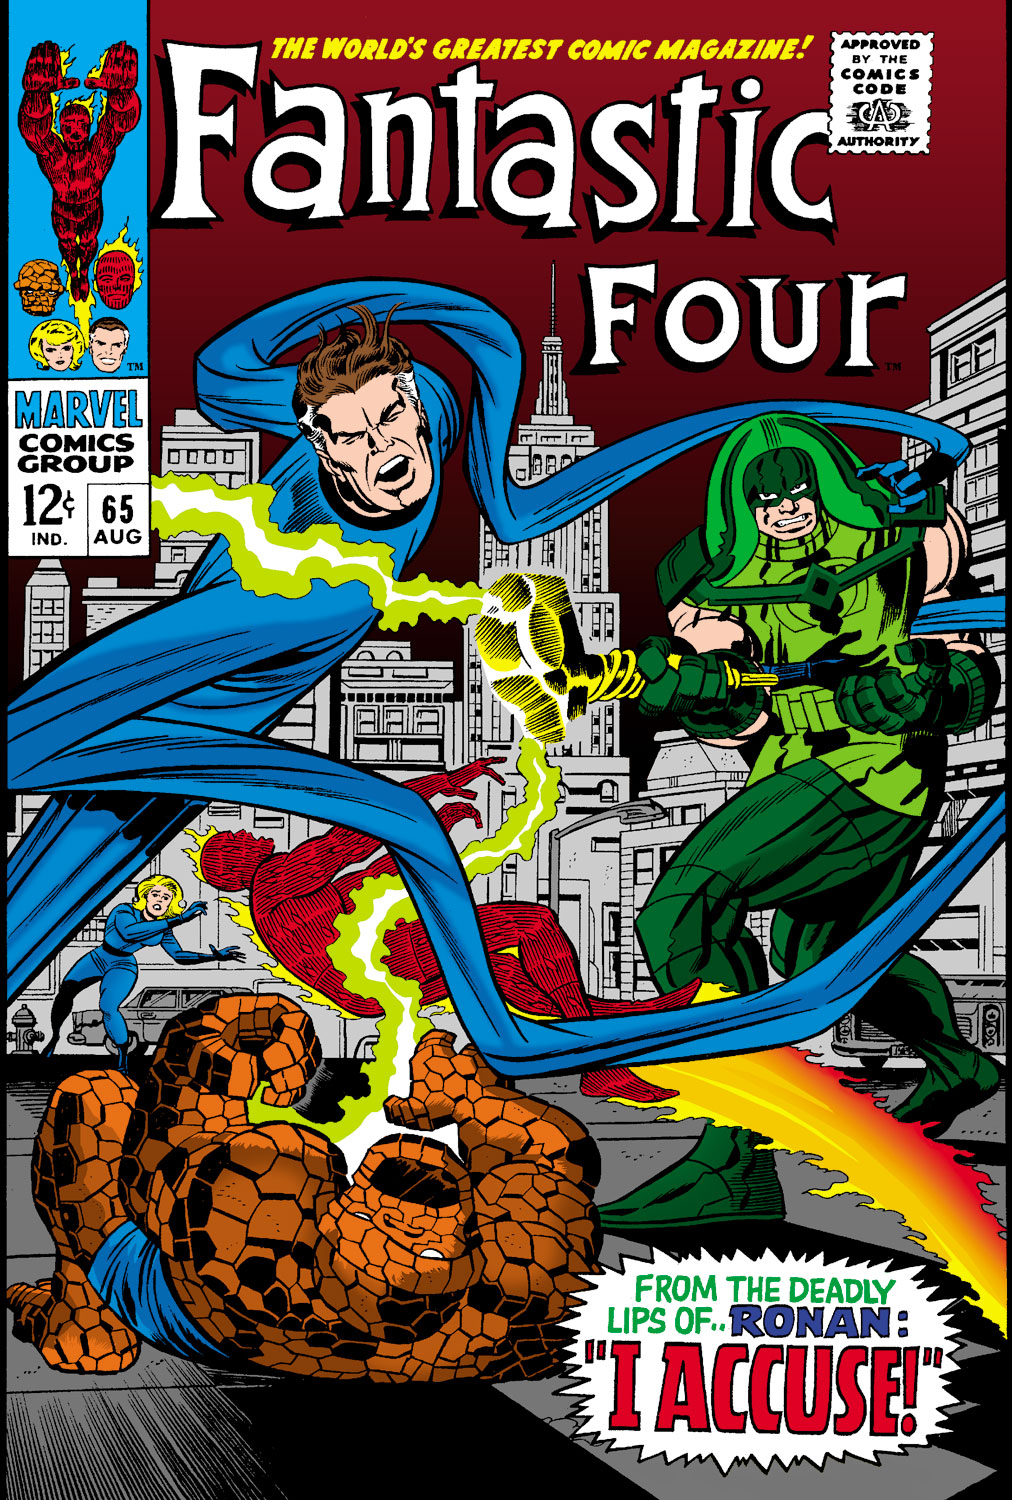 Read online Fantastic Four (1961) comic -  Issue #65 - 1